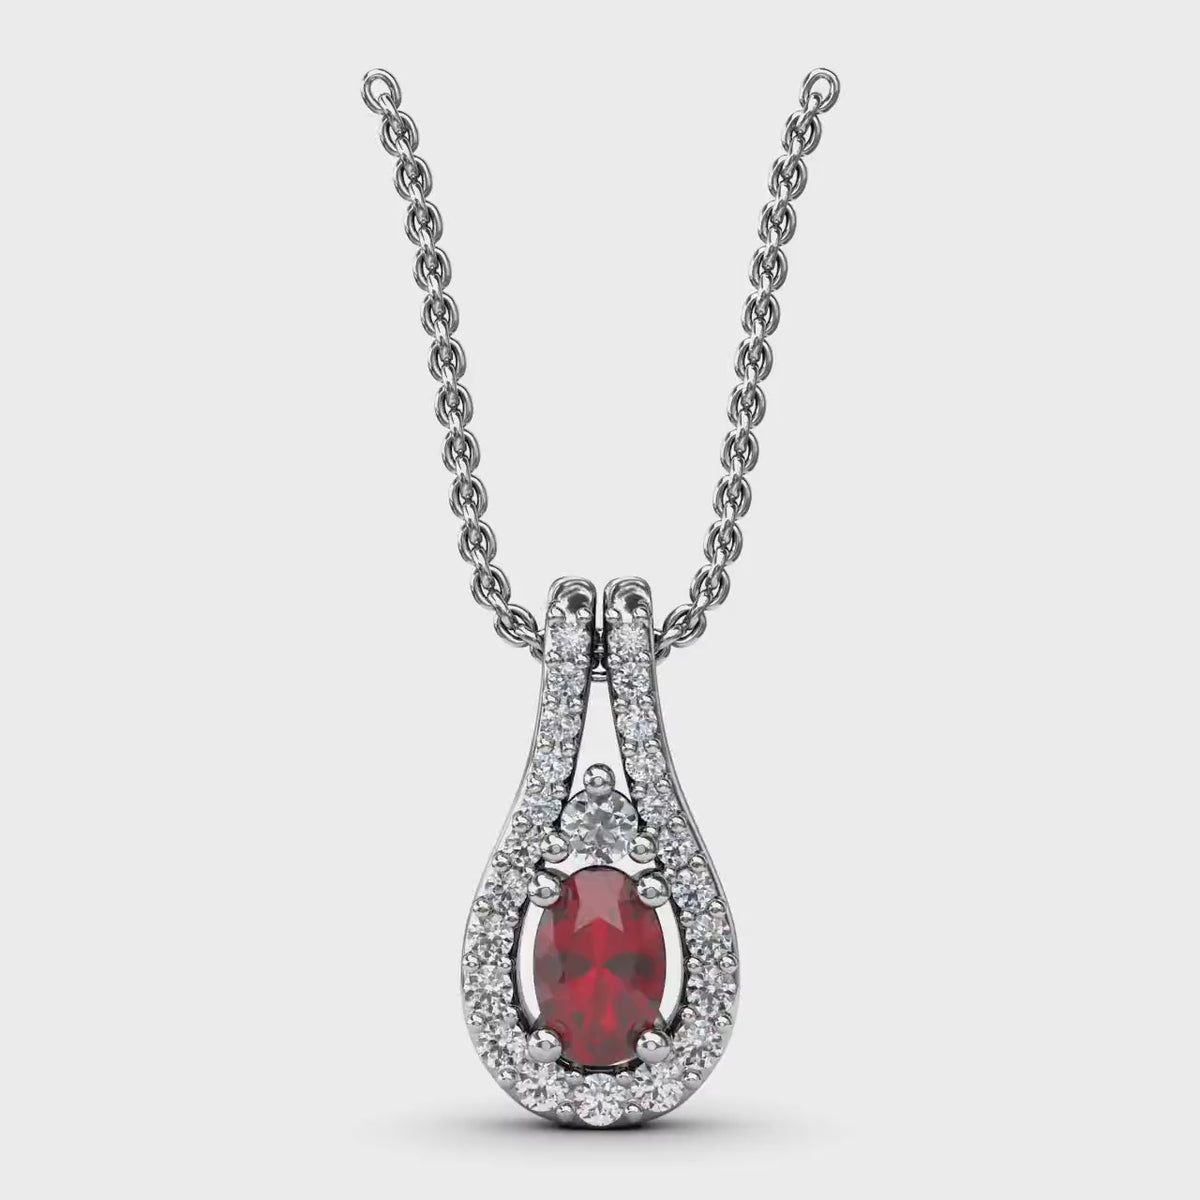 Fana - Halo Teardrop Ruby and Diamond Pendant - P1434R - Available in 14K Gold (White, Yellow or Rose)